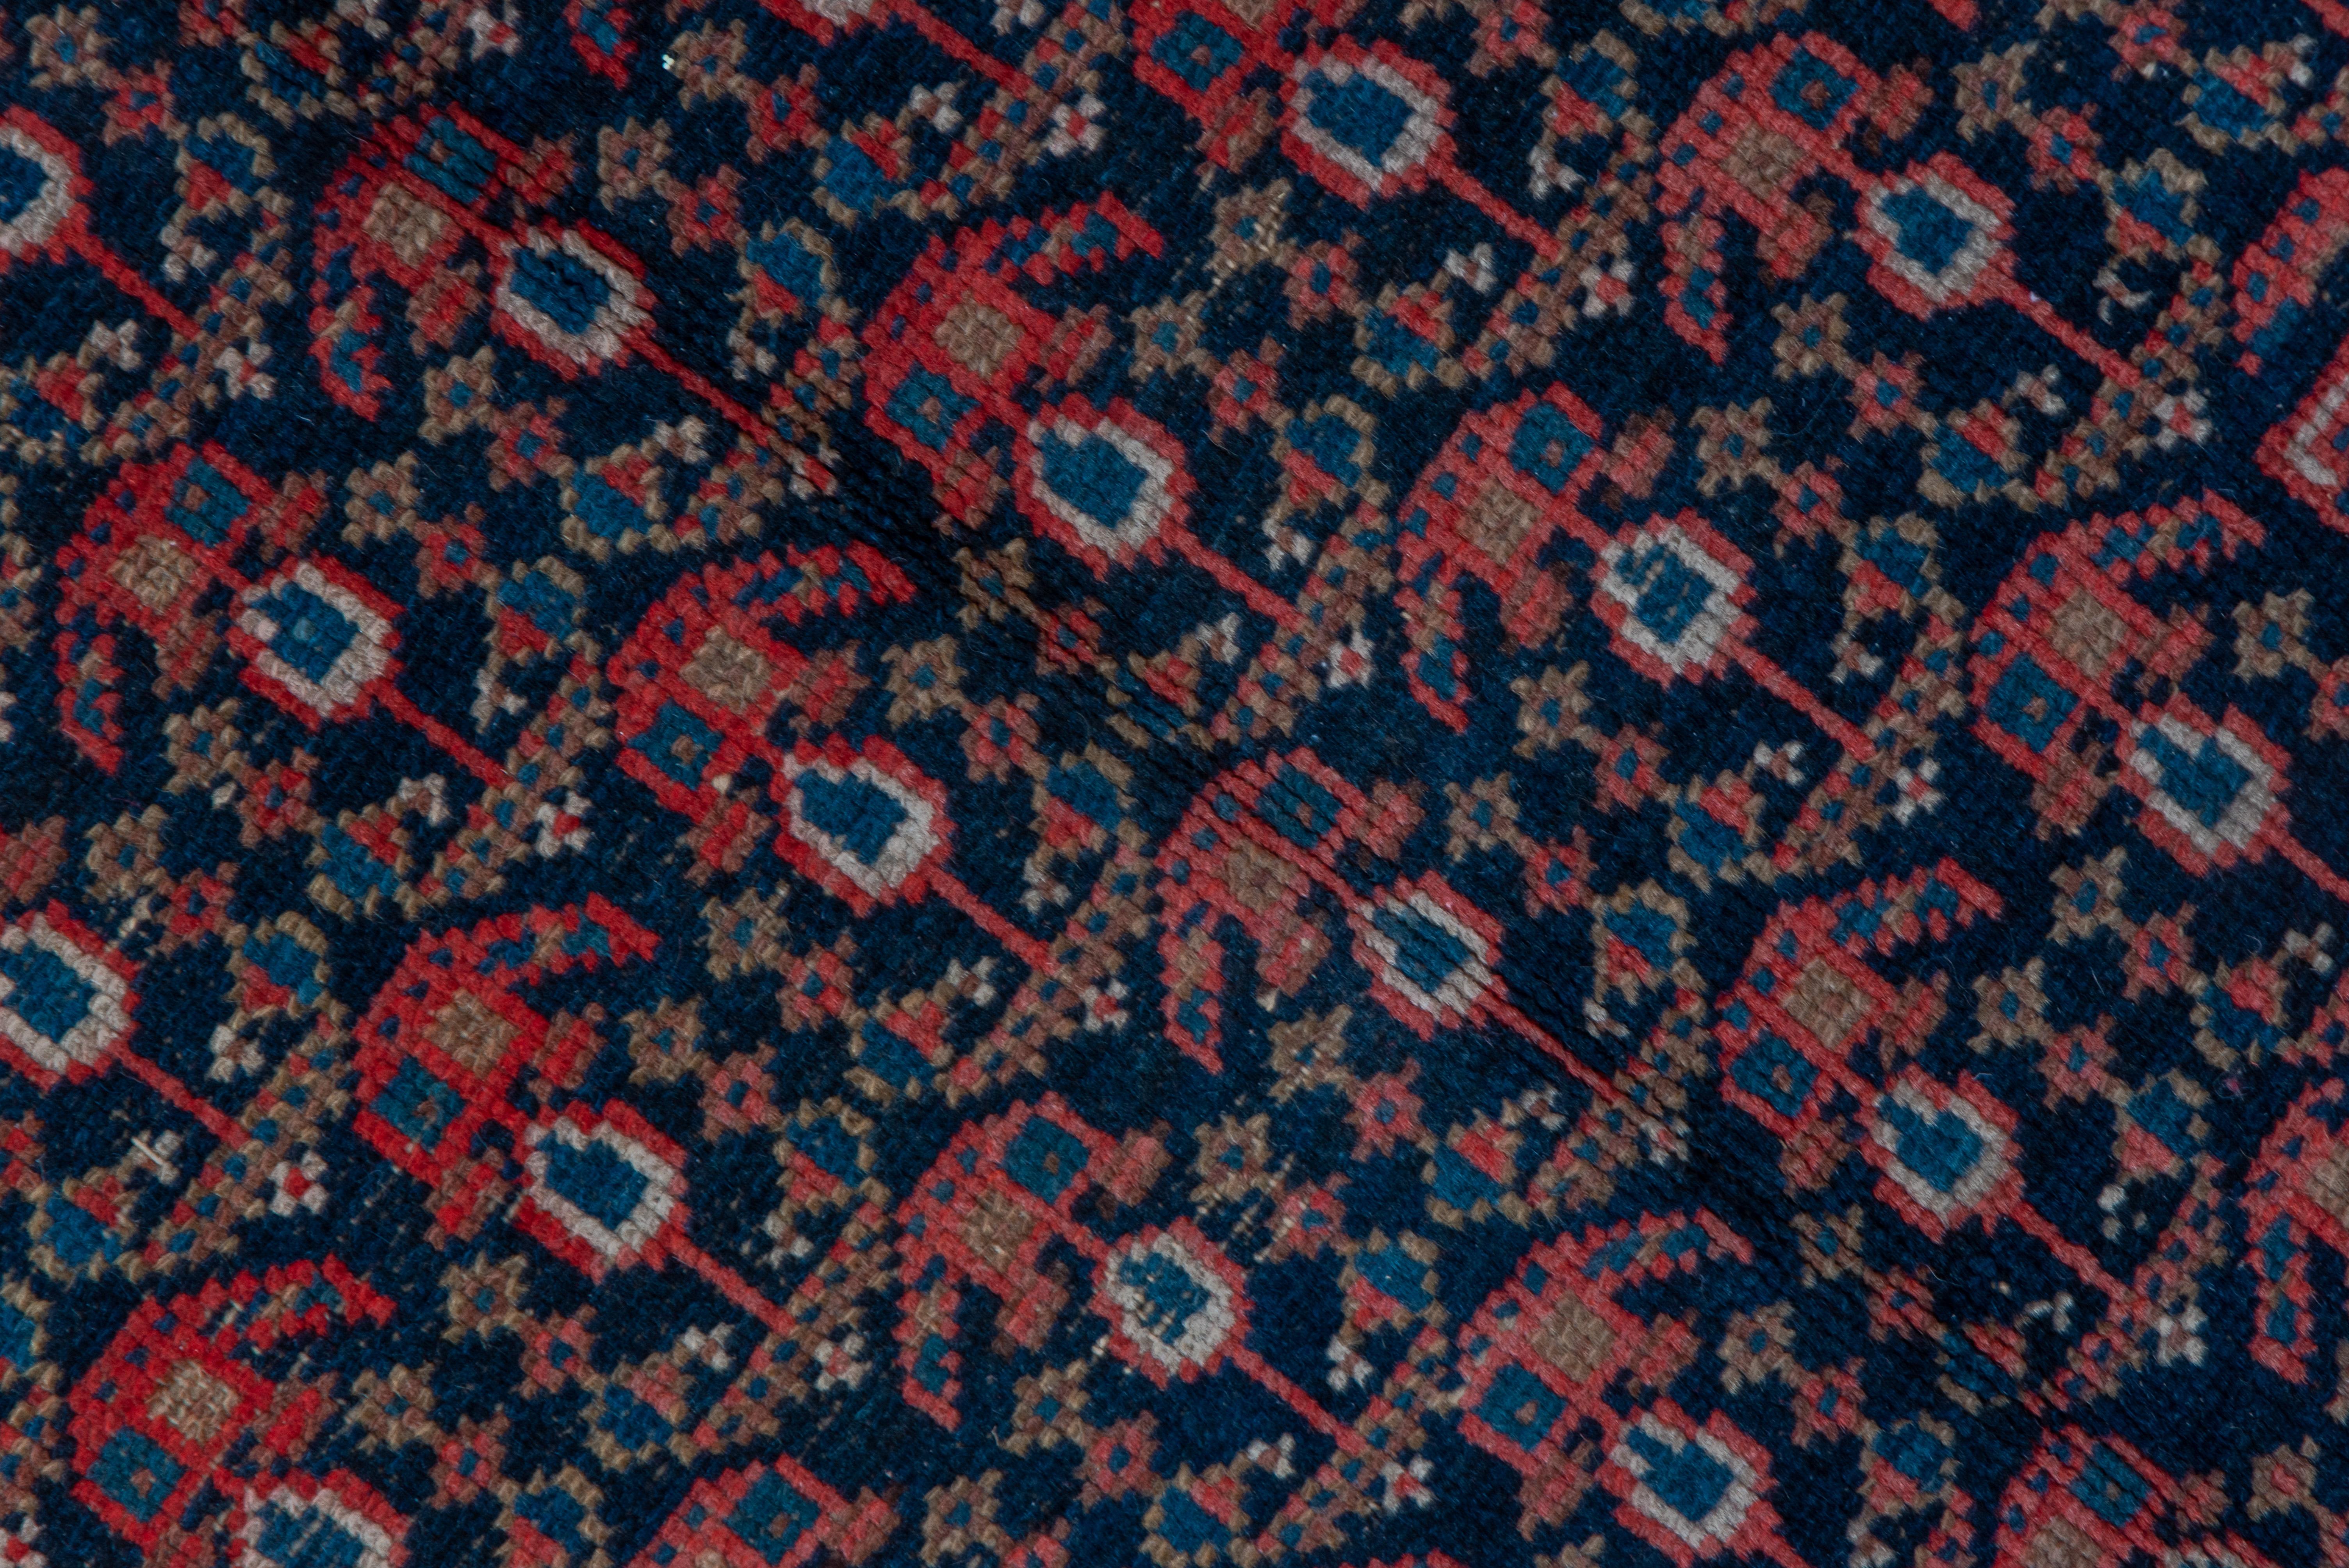 Early 20th Century Shabby Chic Antique Persian Malayer Gallery Rug, Navy & Light Red Paisley Field